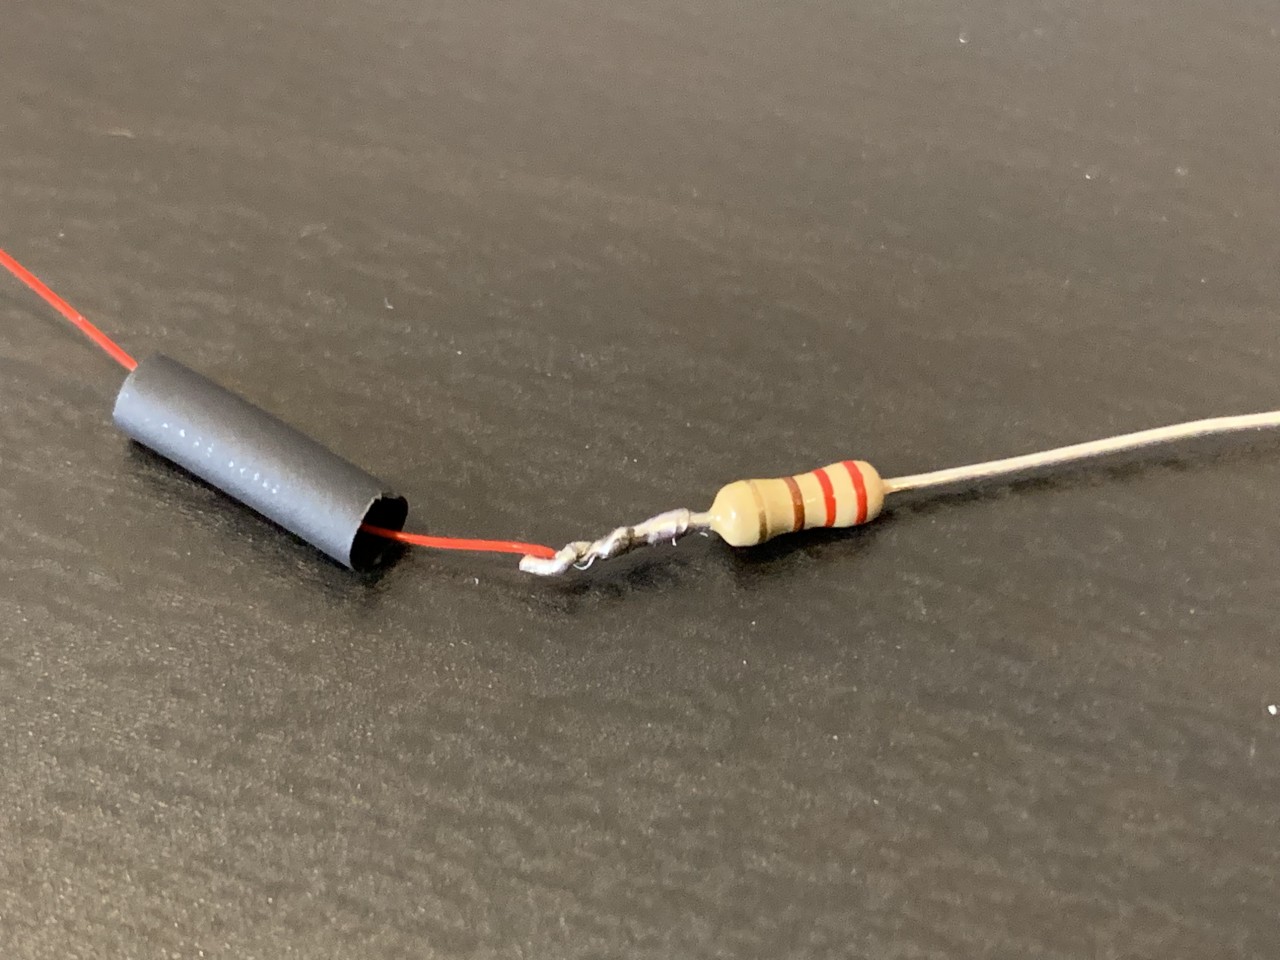 Solder wires onto the resistor, trim to size, and cover with heat shrink